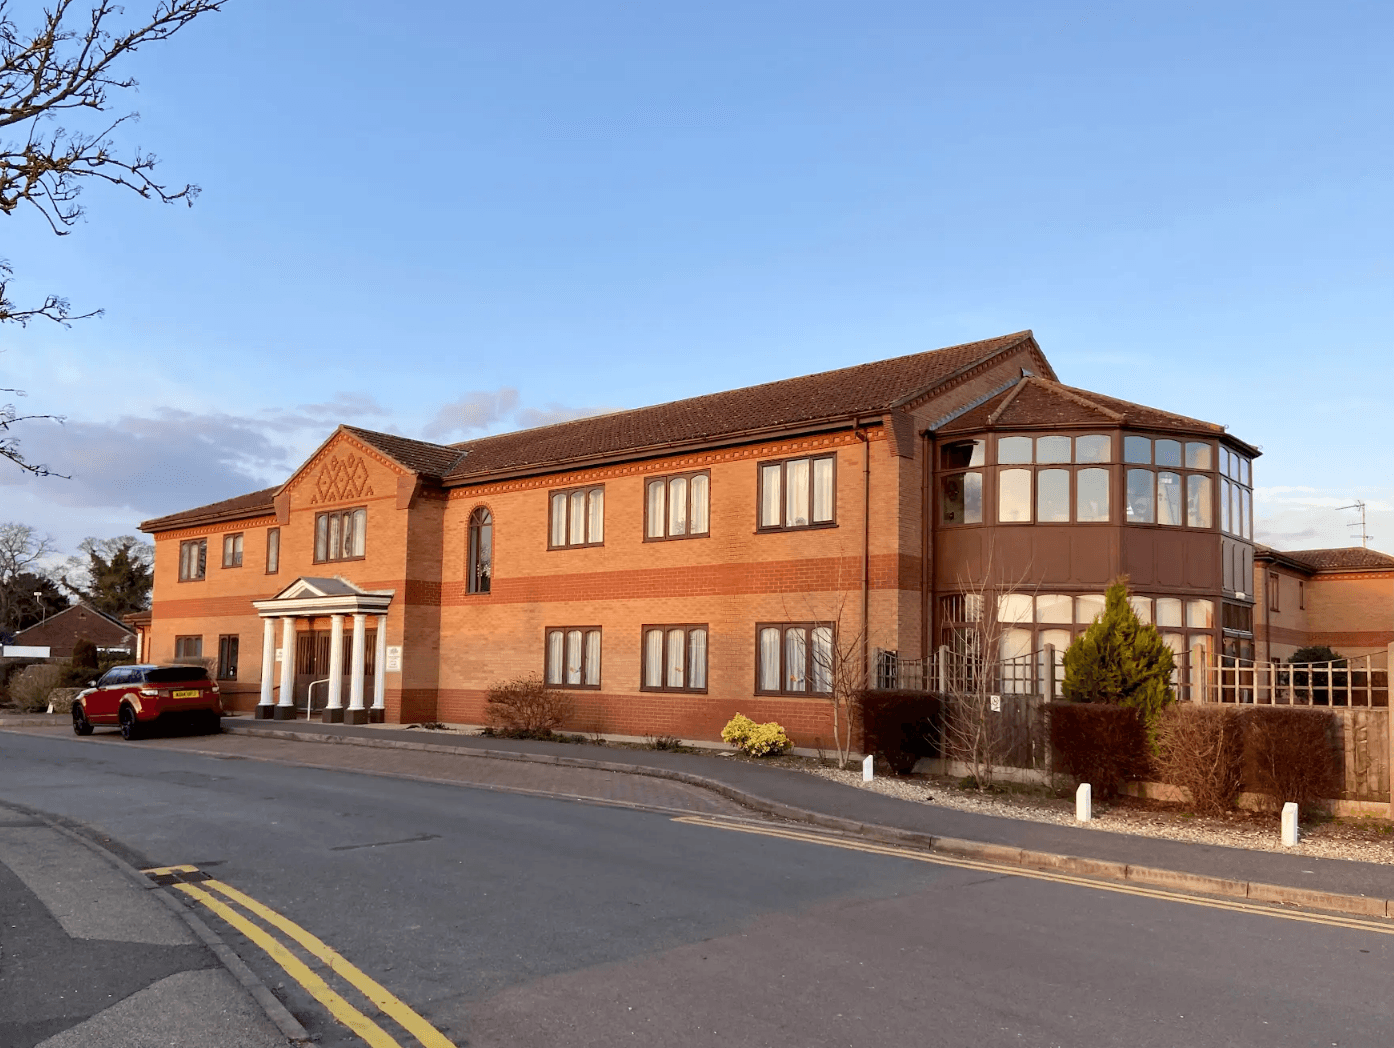 Toray Pines care home in Coningsby 1